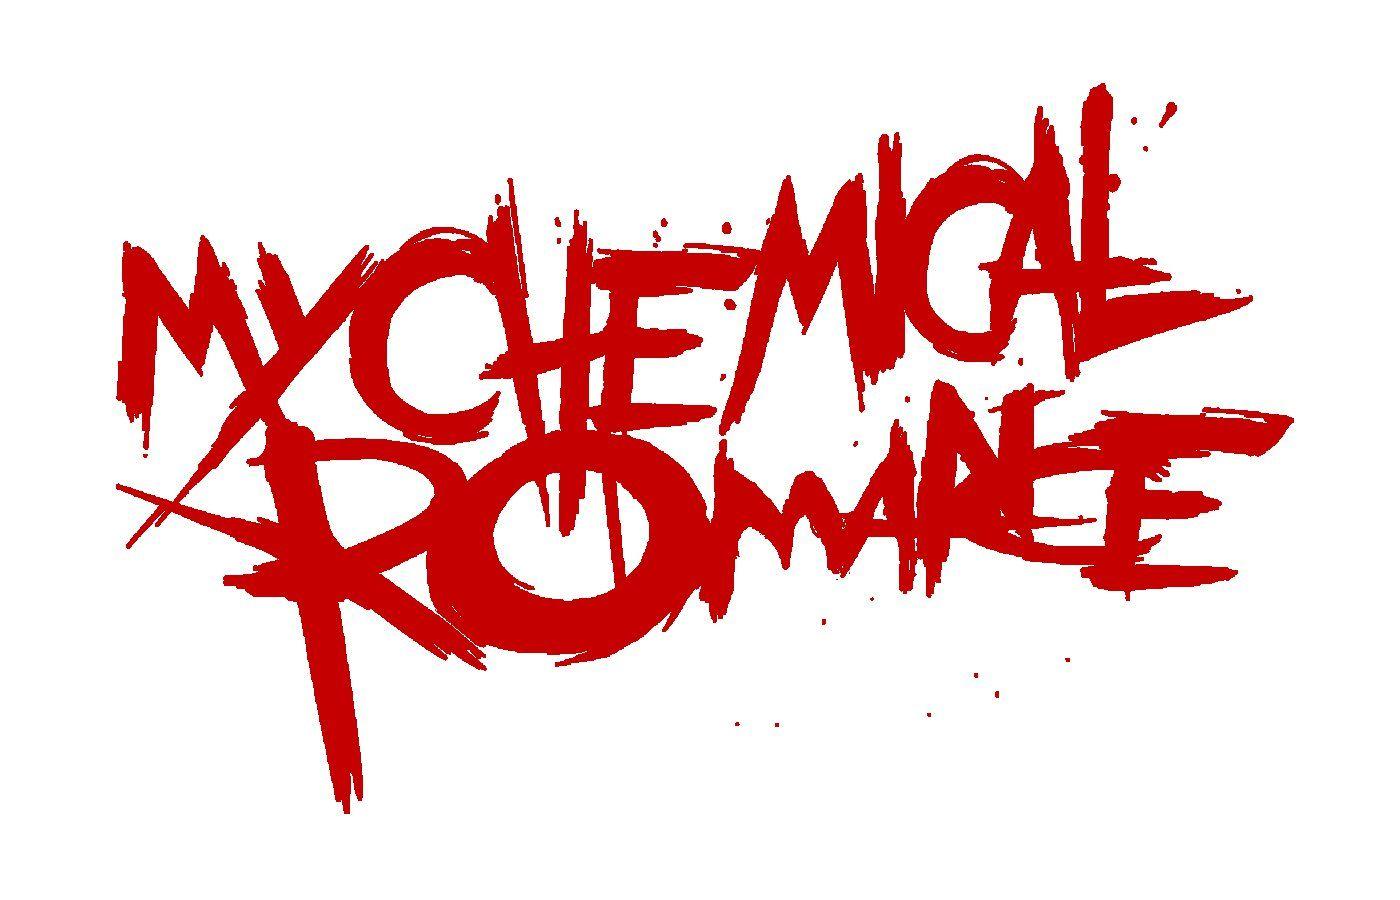 Mcrx Logo - Meaning My Chemical Romance logo and symbol. history and evolution